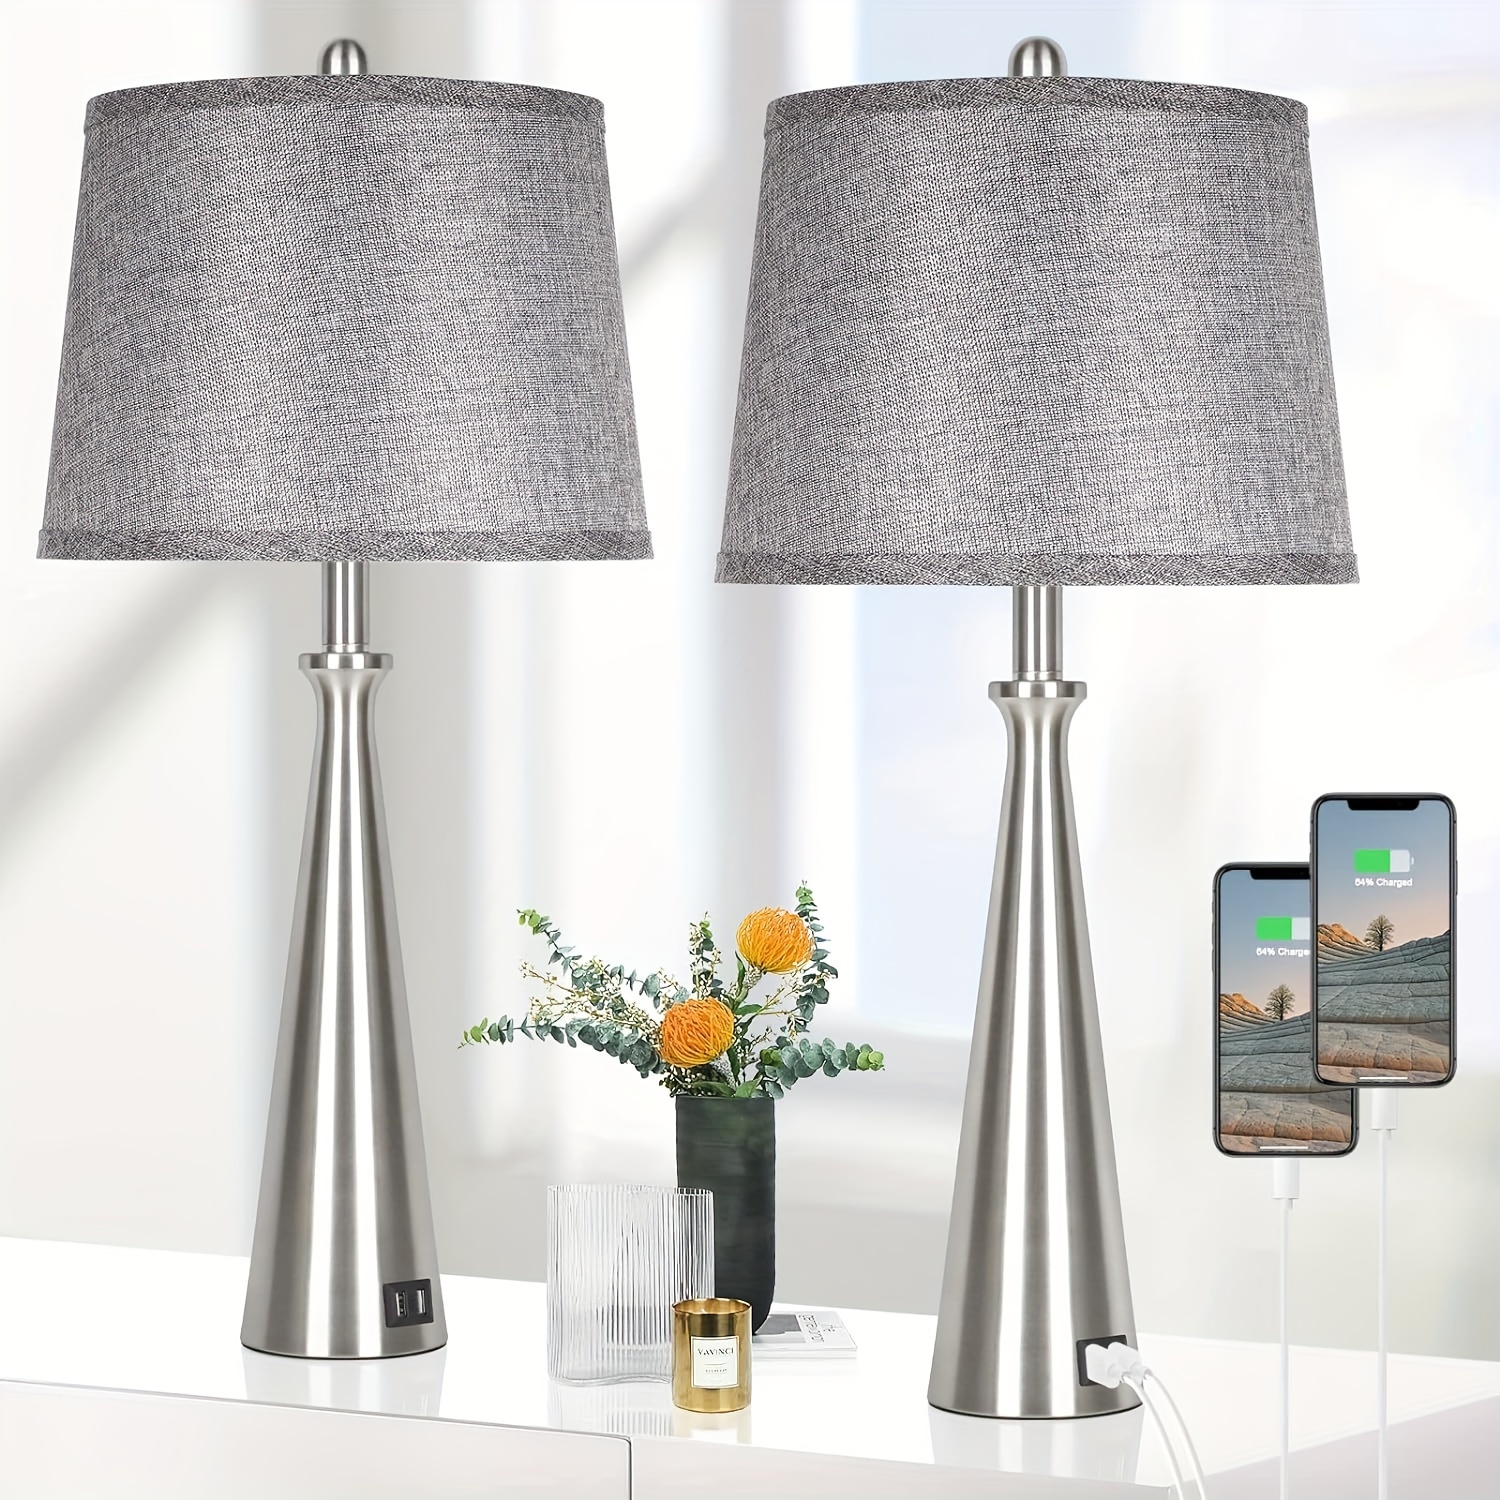 

Set Of 2 Table Lamps With 2 Usb Charging Ports, Bedside Lamp With Grey Shade, 26.4 Inch Tall Nickel Nightstand Lamp With Rotary Switch, Desk Lamp With E26 Edison Socket For Living Room Bedroom Office